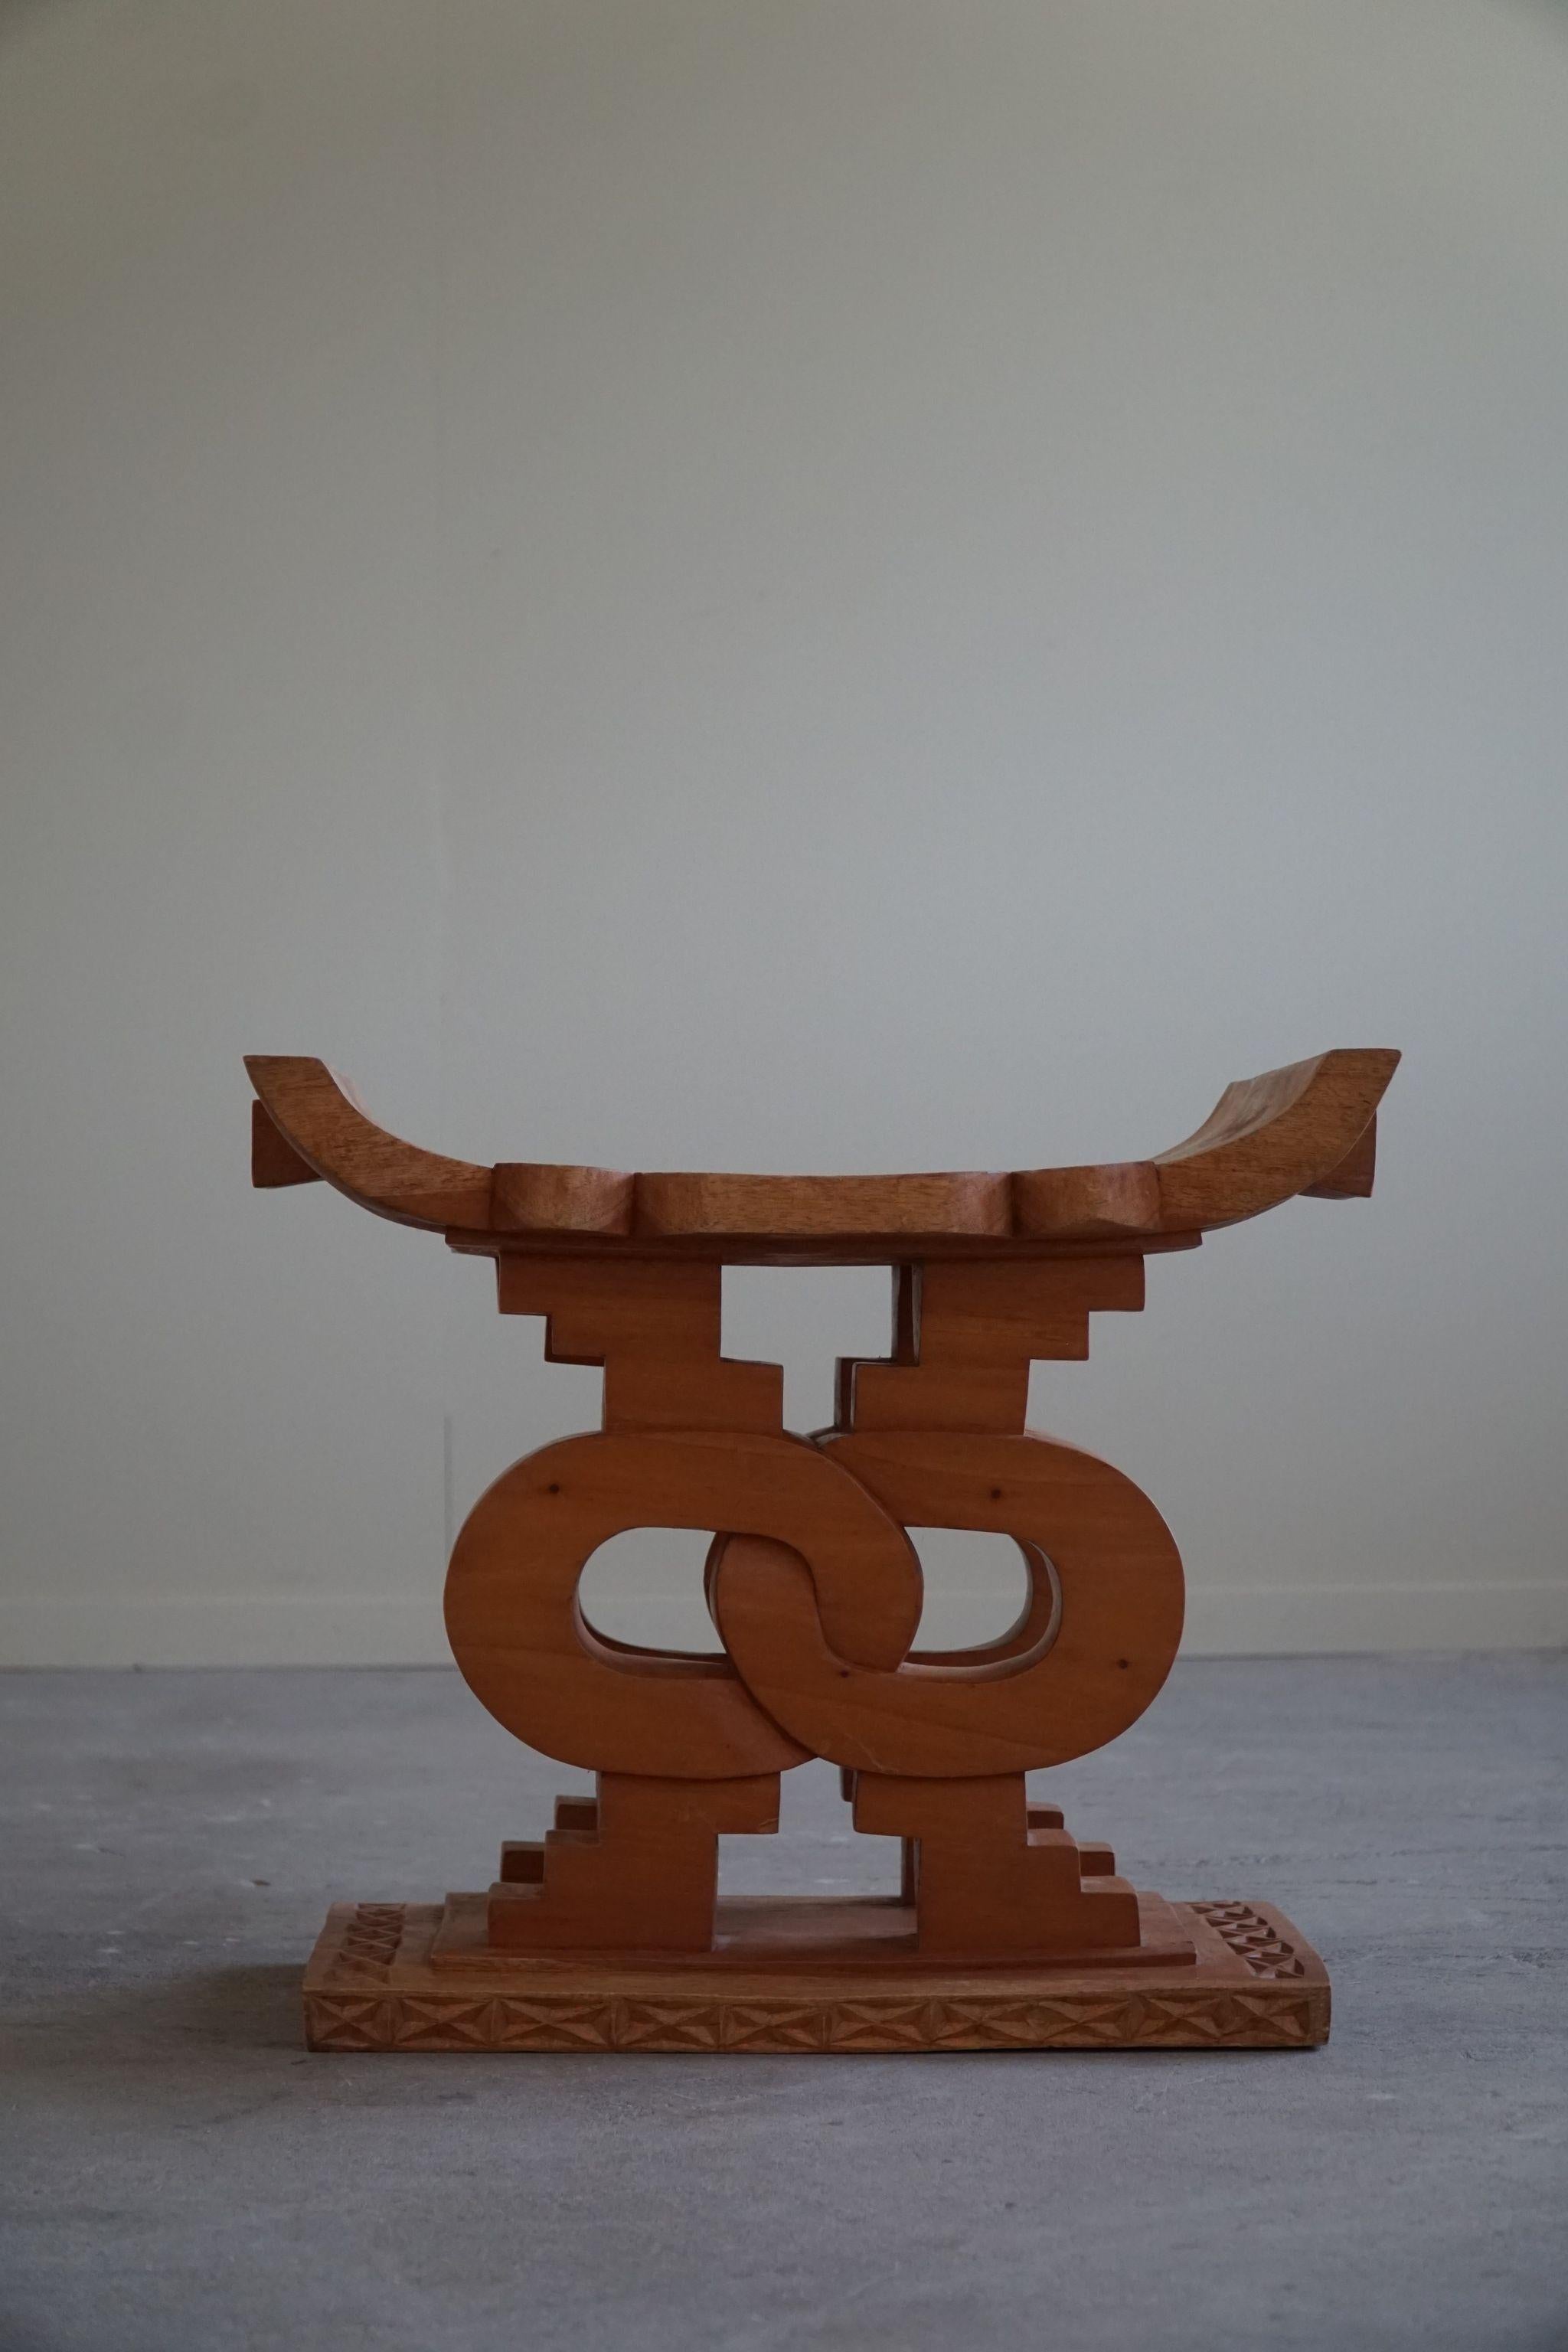 West African Hand Carved Wooden Ashanti Stool, Wabi Sabi, 20th Century In Good Condition For Sale In Odense, DK